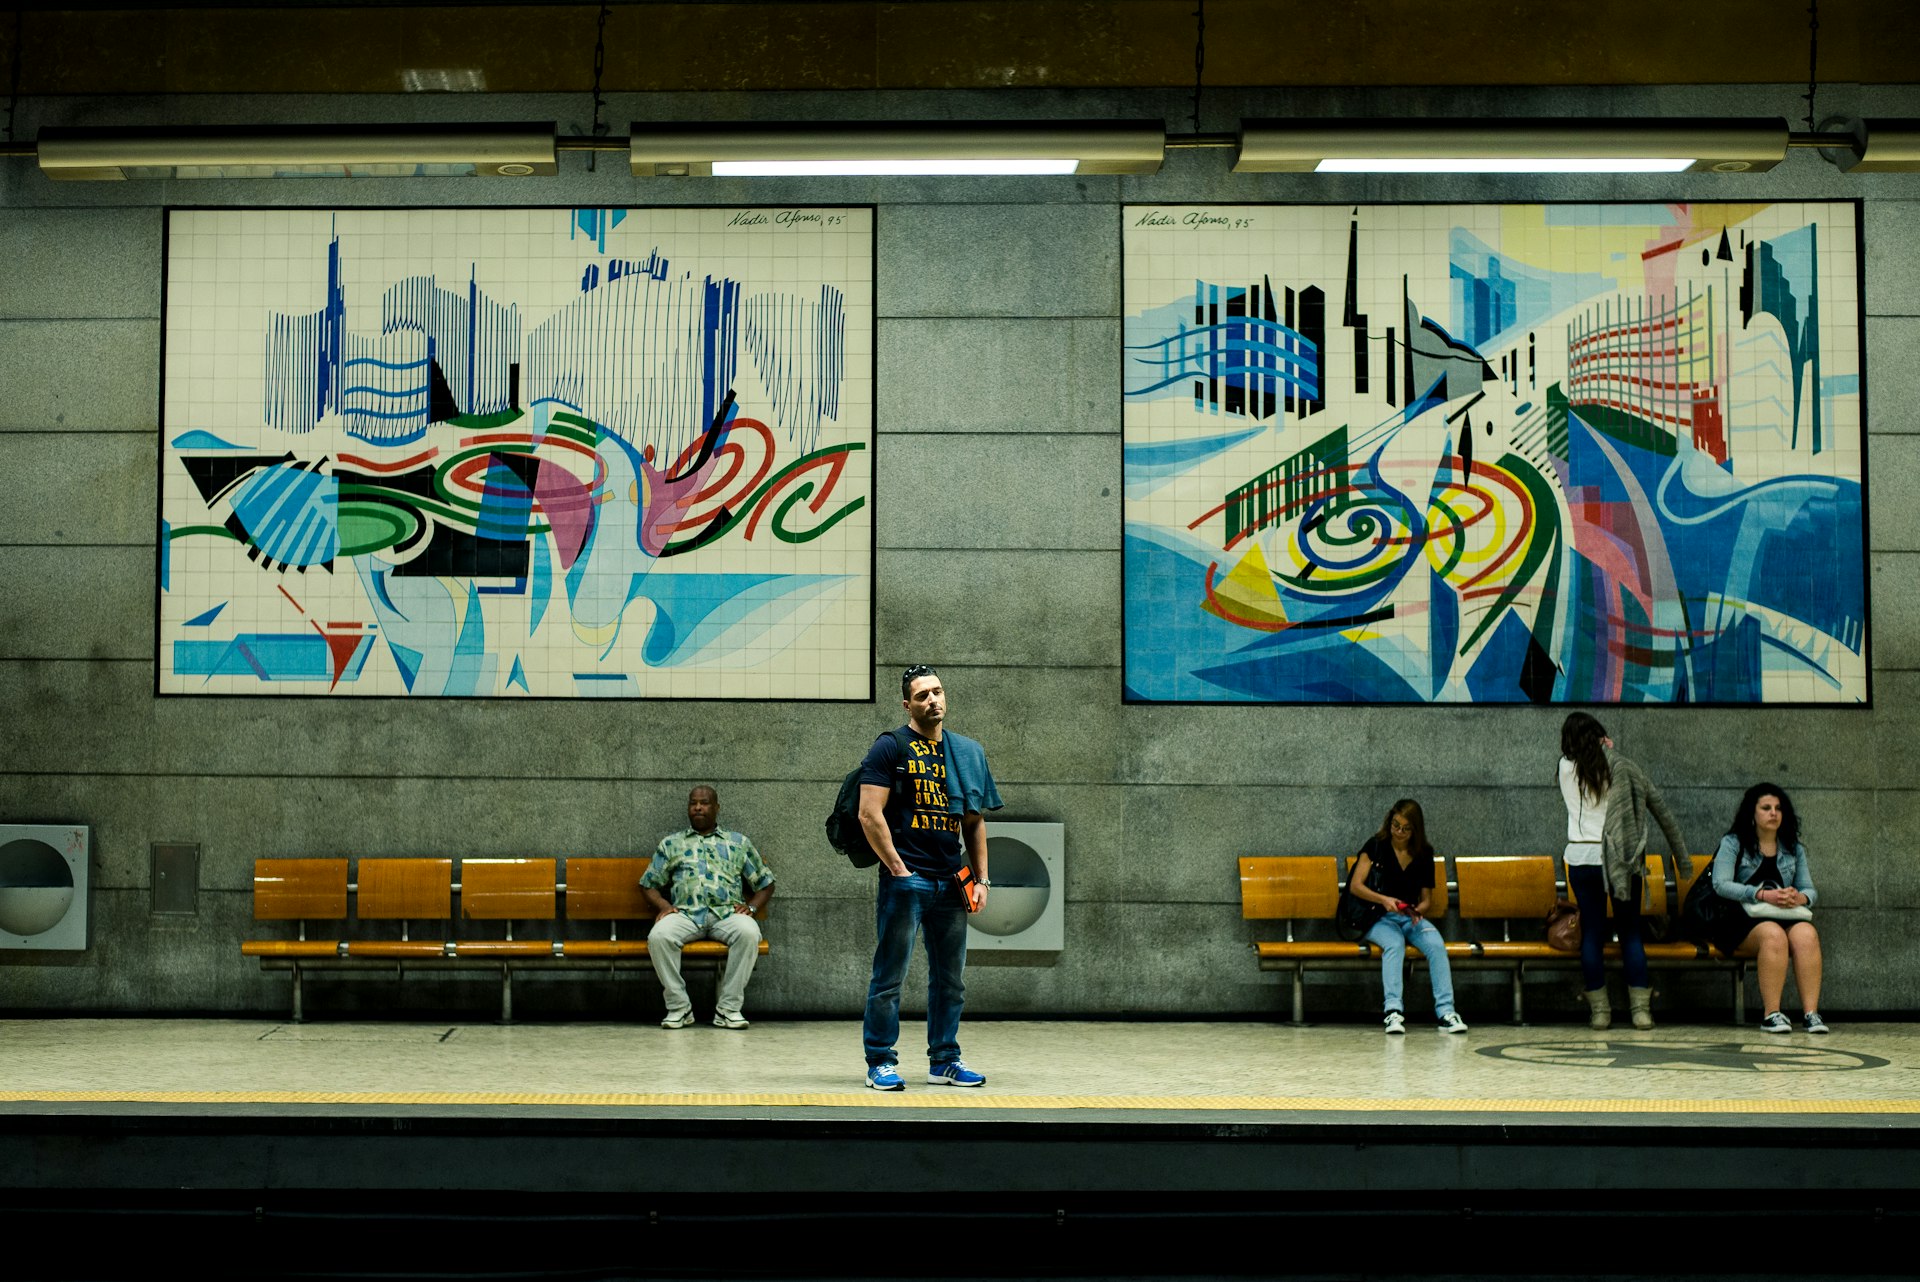 People waiting at an art-filled underground station in Lisbon